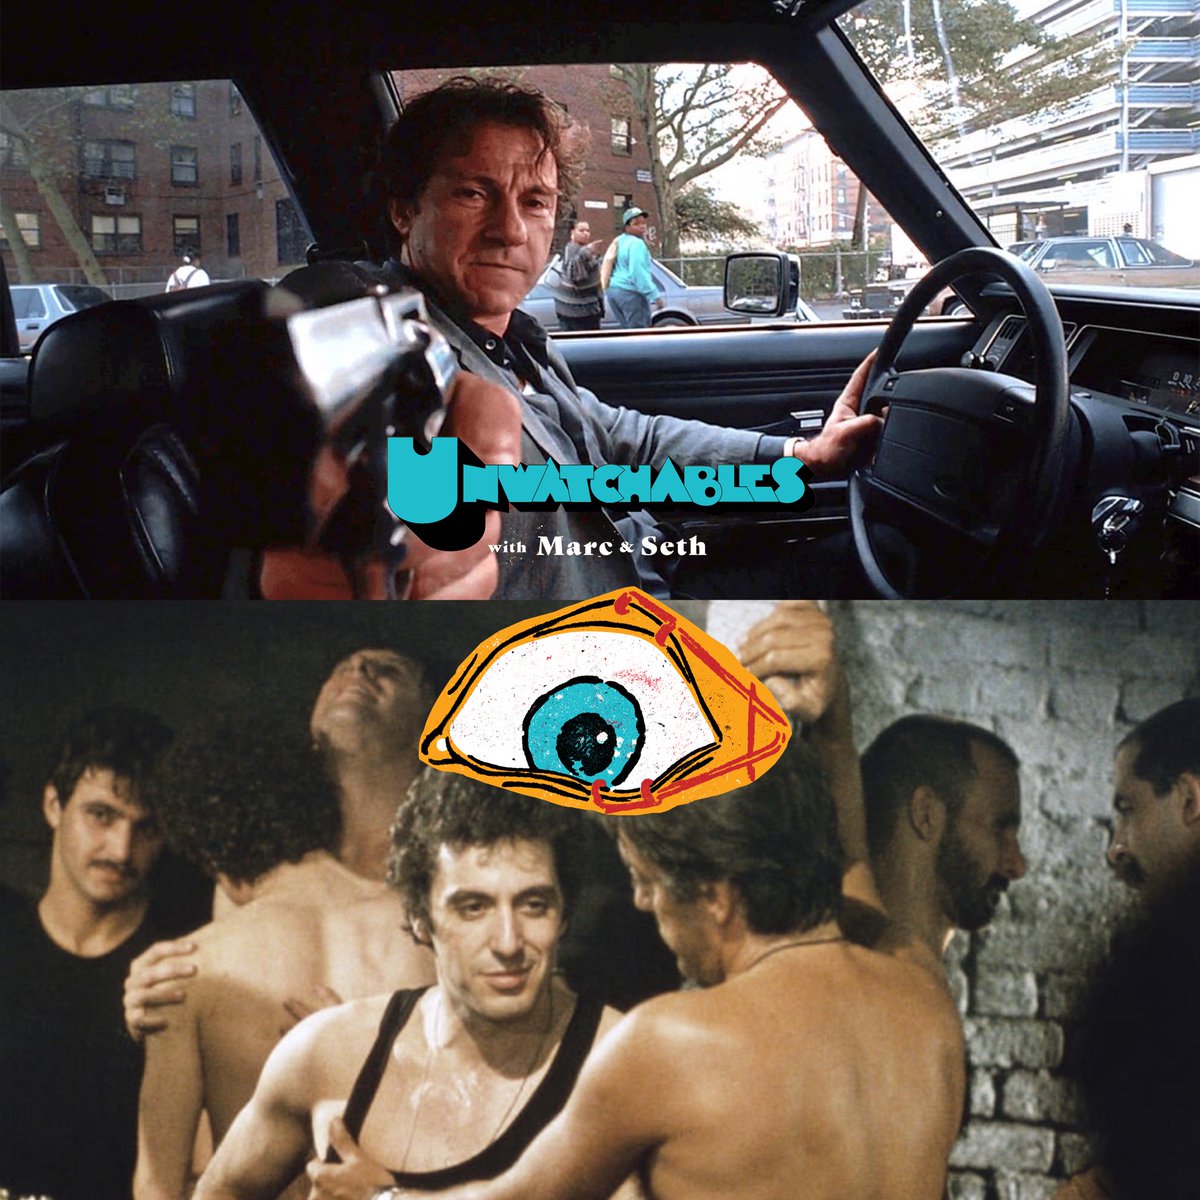 This week’s Unwatchables is a double feature of “NYC cop movie sleazecore”— a term coined by guest @jasondashbailey. The films are William Friedkin’s (R.I.P) 1980 undercover crime thriller CRUISING, and Abel Ferrara’s 1992 morality play BAD LIEUTENANT.
tinyurl.com/bdesfkf8